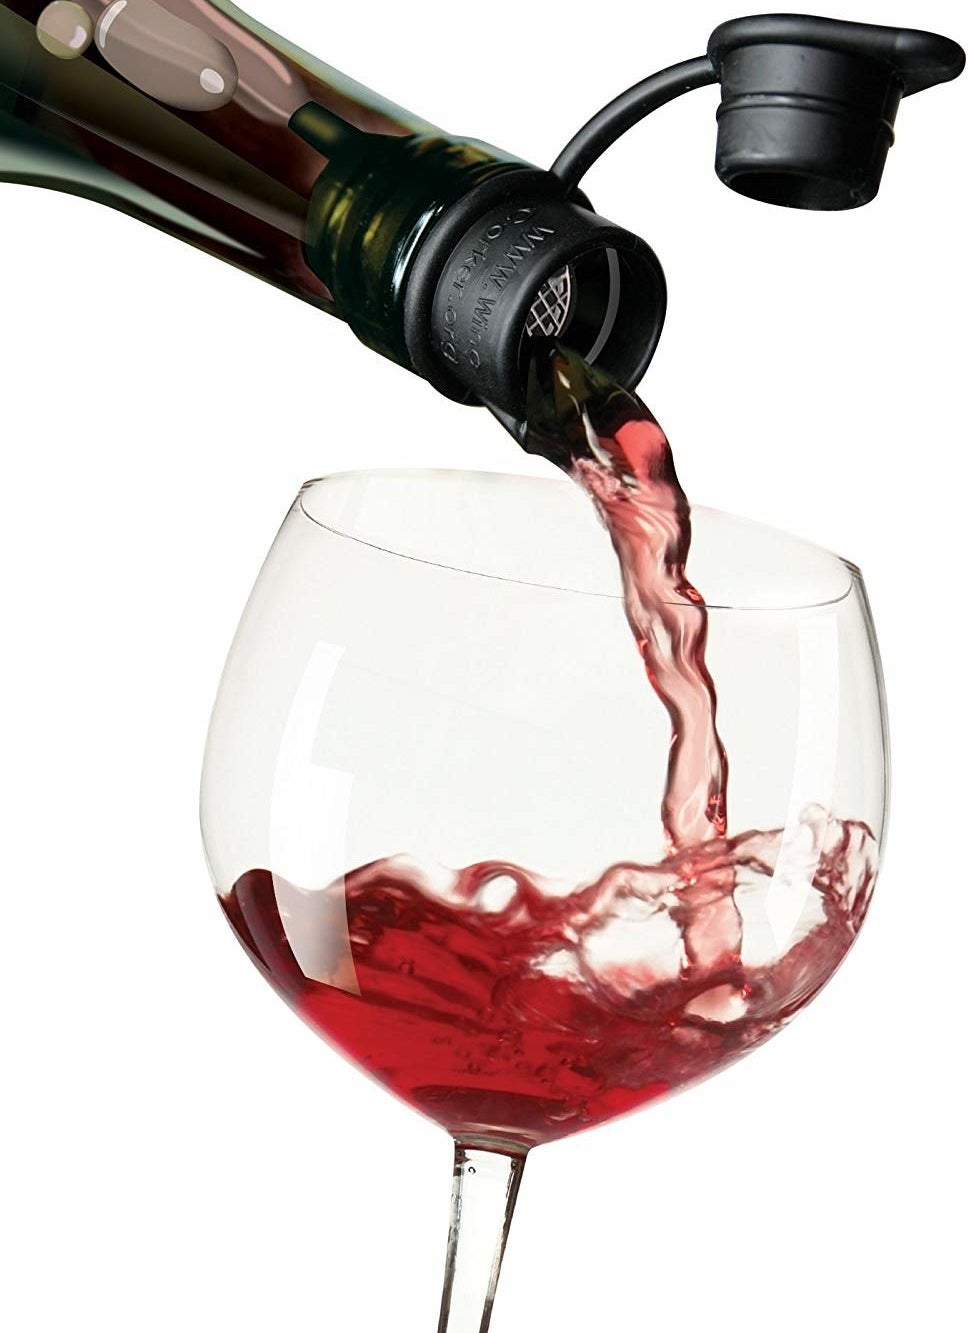 wine being poured from a bottle through the filter/pourer